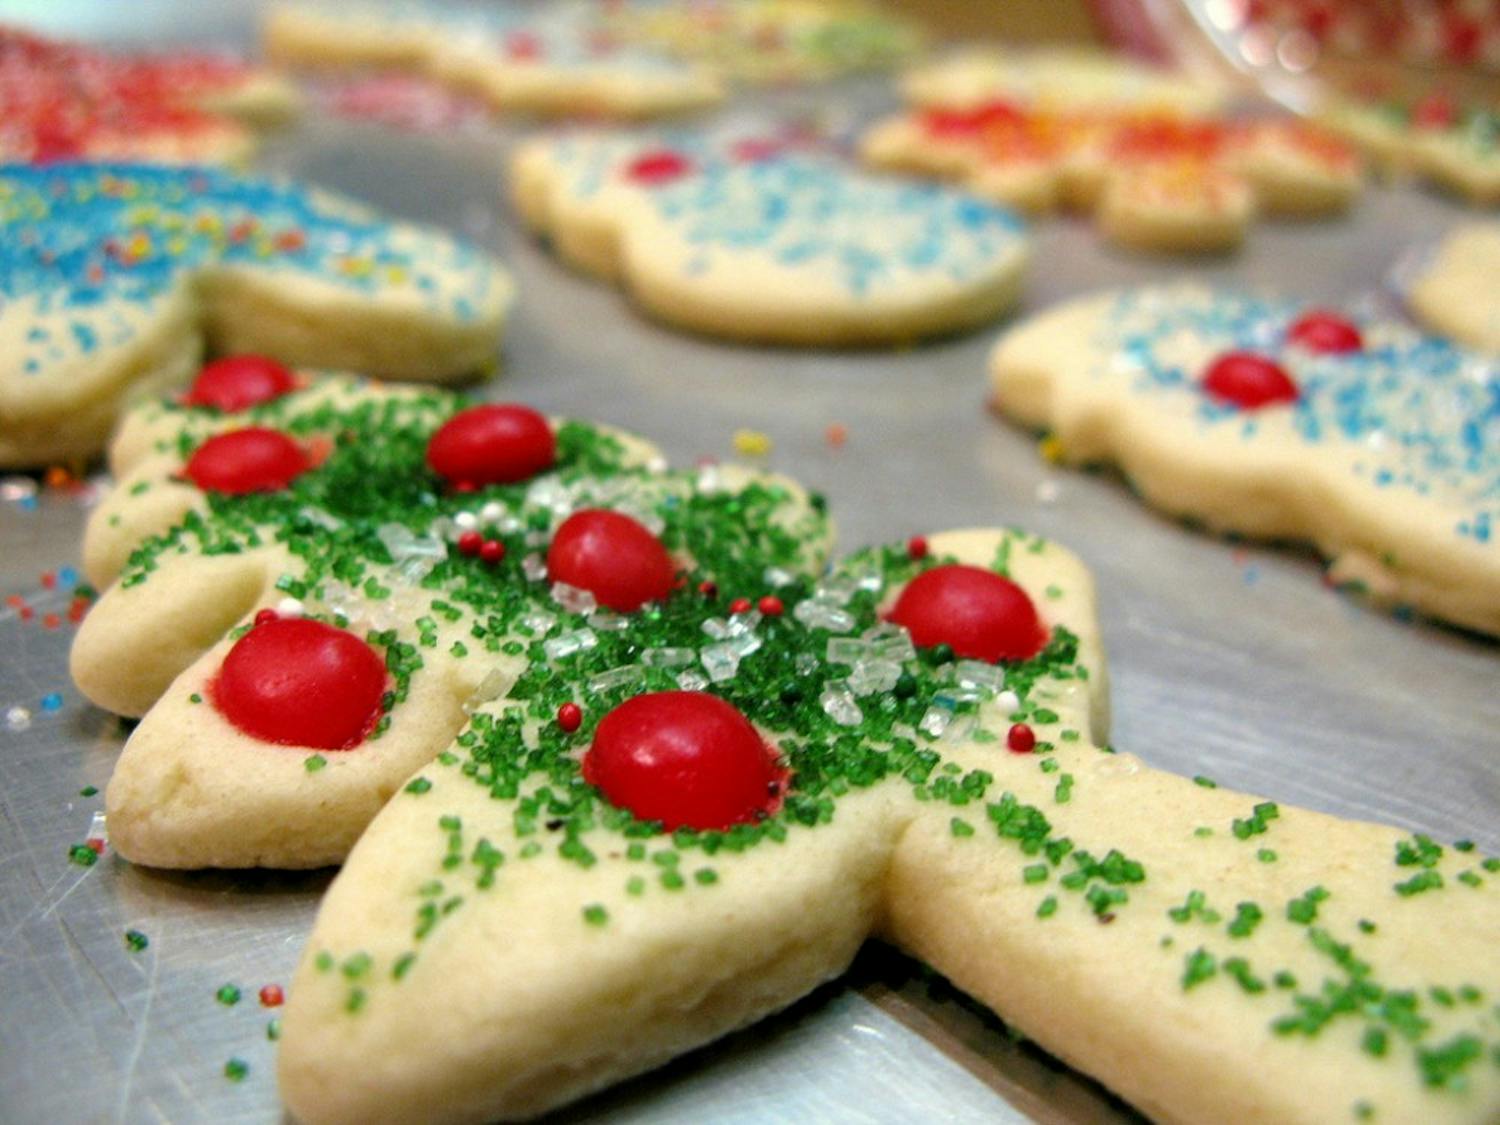 Baking cookies at Christmastime is a great way to spend time with friends and family, get in the holiday spirit and end up with some sweet treats to enjoy until New Year’s. Here's five cookie&nbsp;recipes&nbsp;to enjoy during the holiday season.&nbsp;